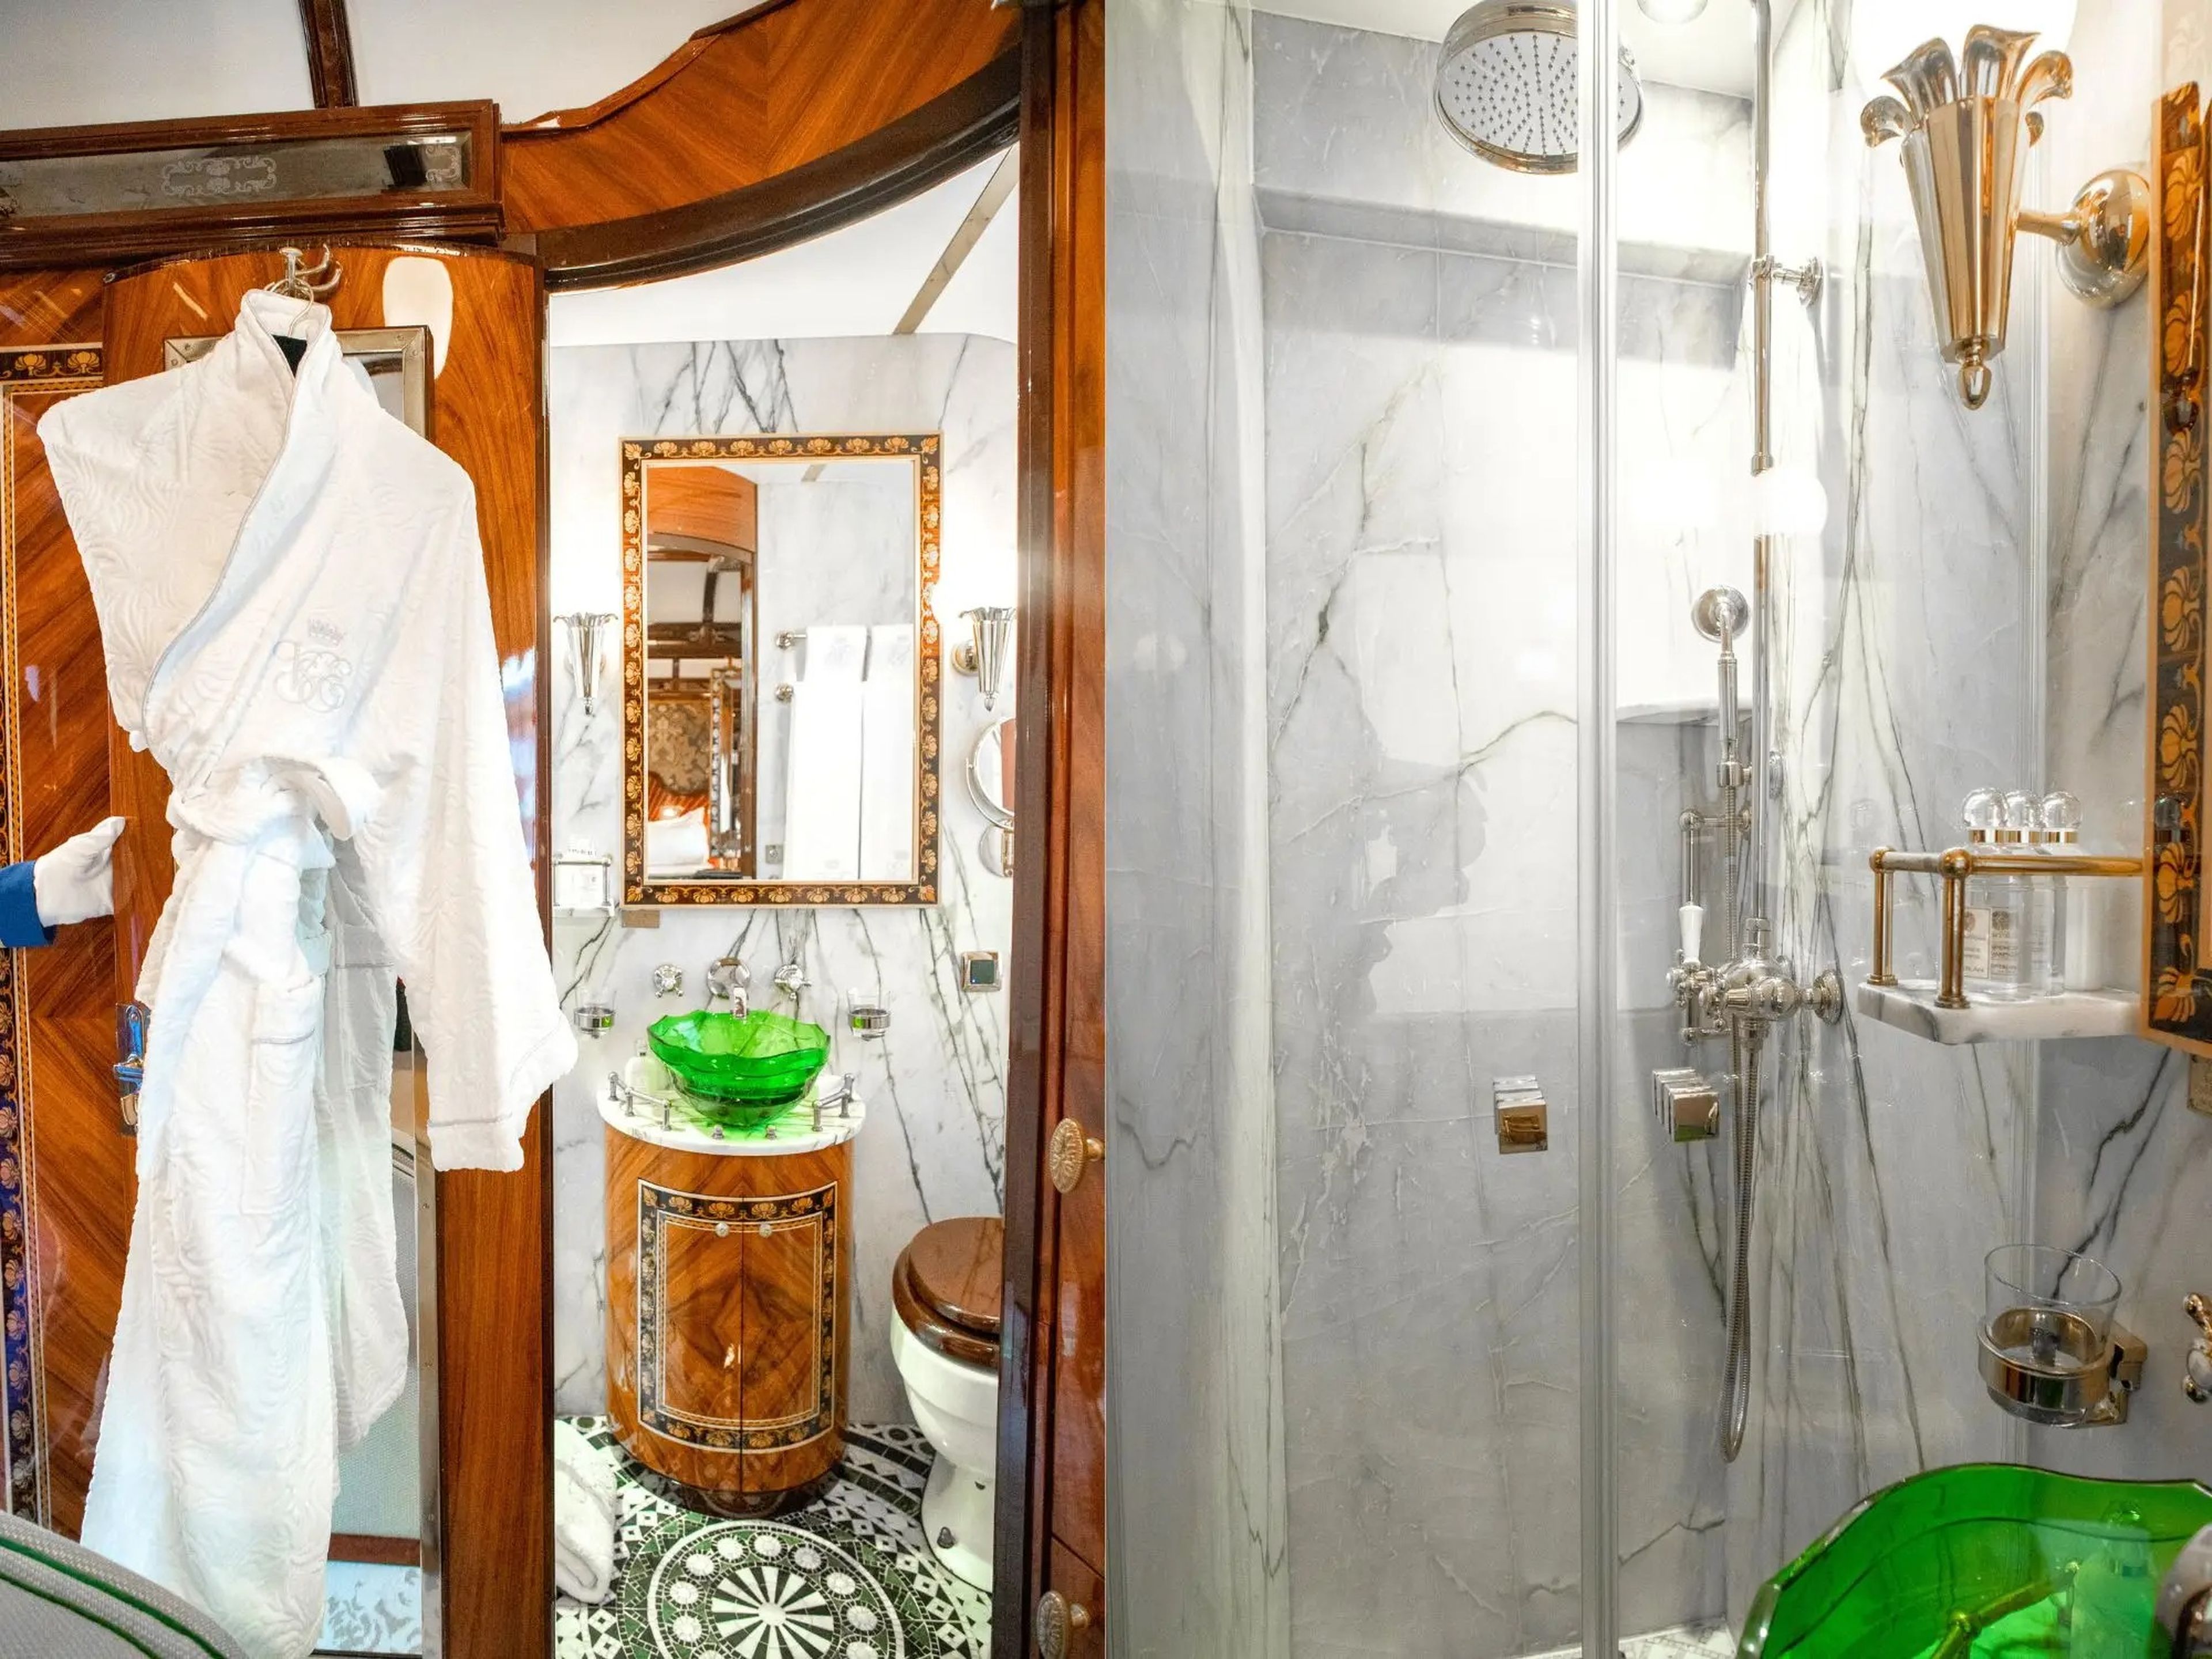 Left: a wood door opens to reveal a marble bathroom with white robes hanging on the left. Right: A silver shower head behind a glass door in a bathroom with marble walls